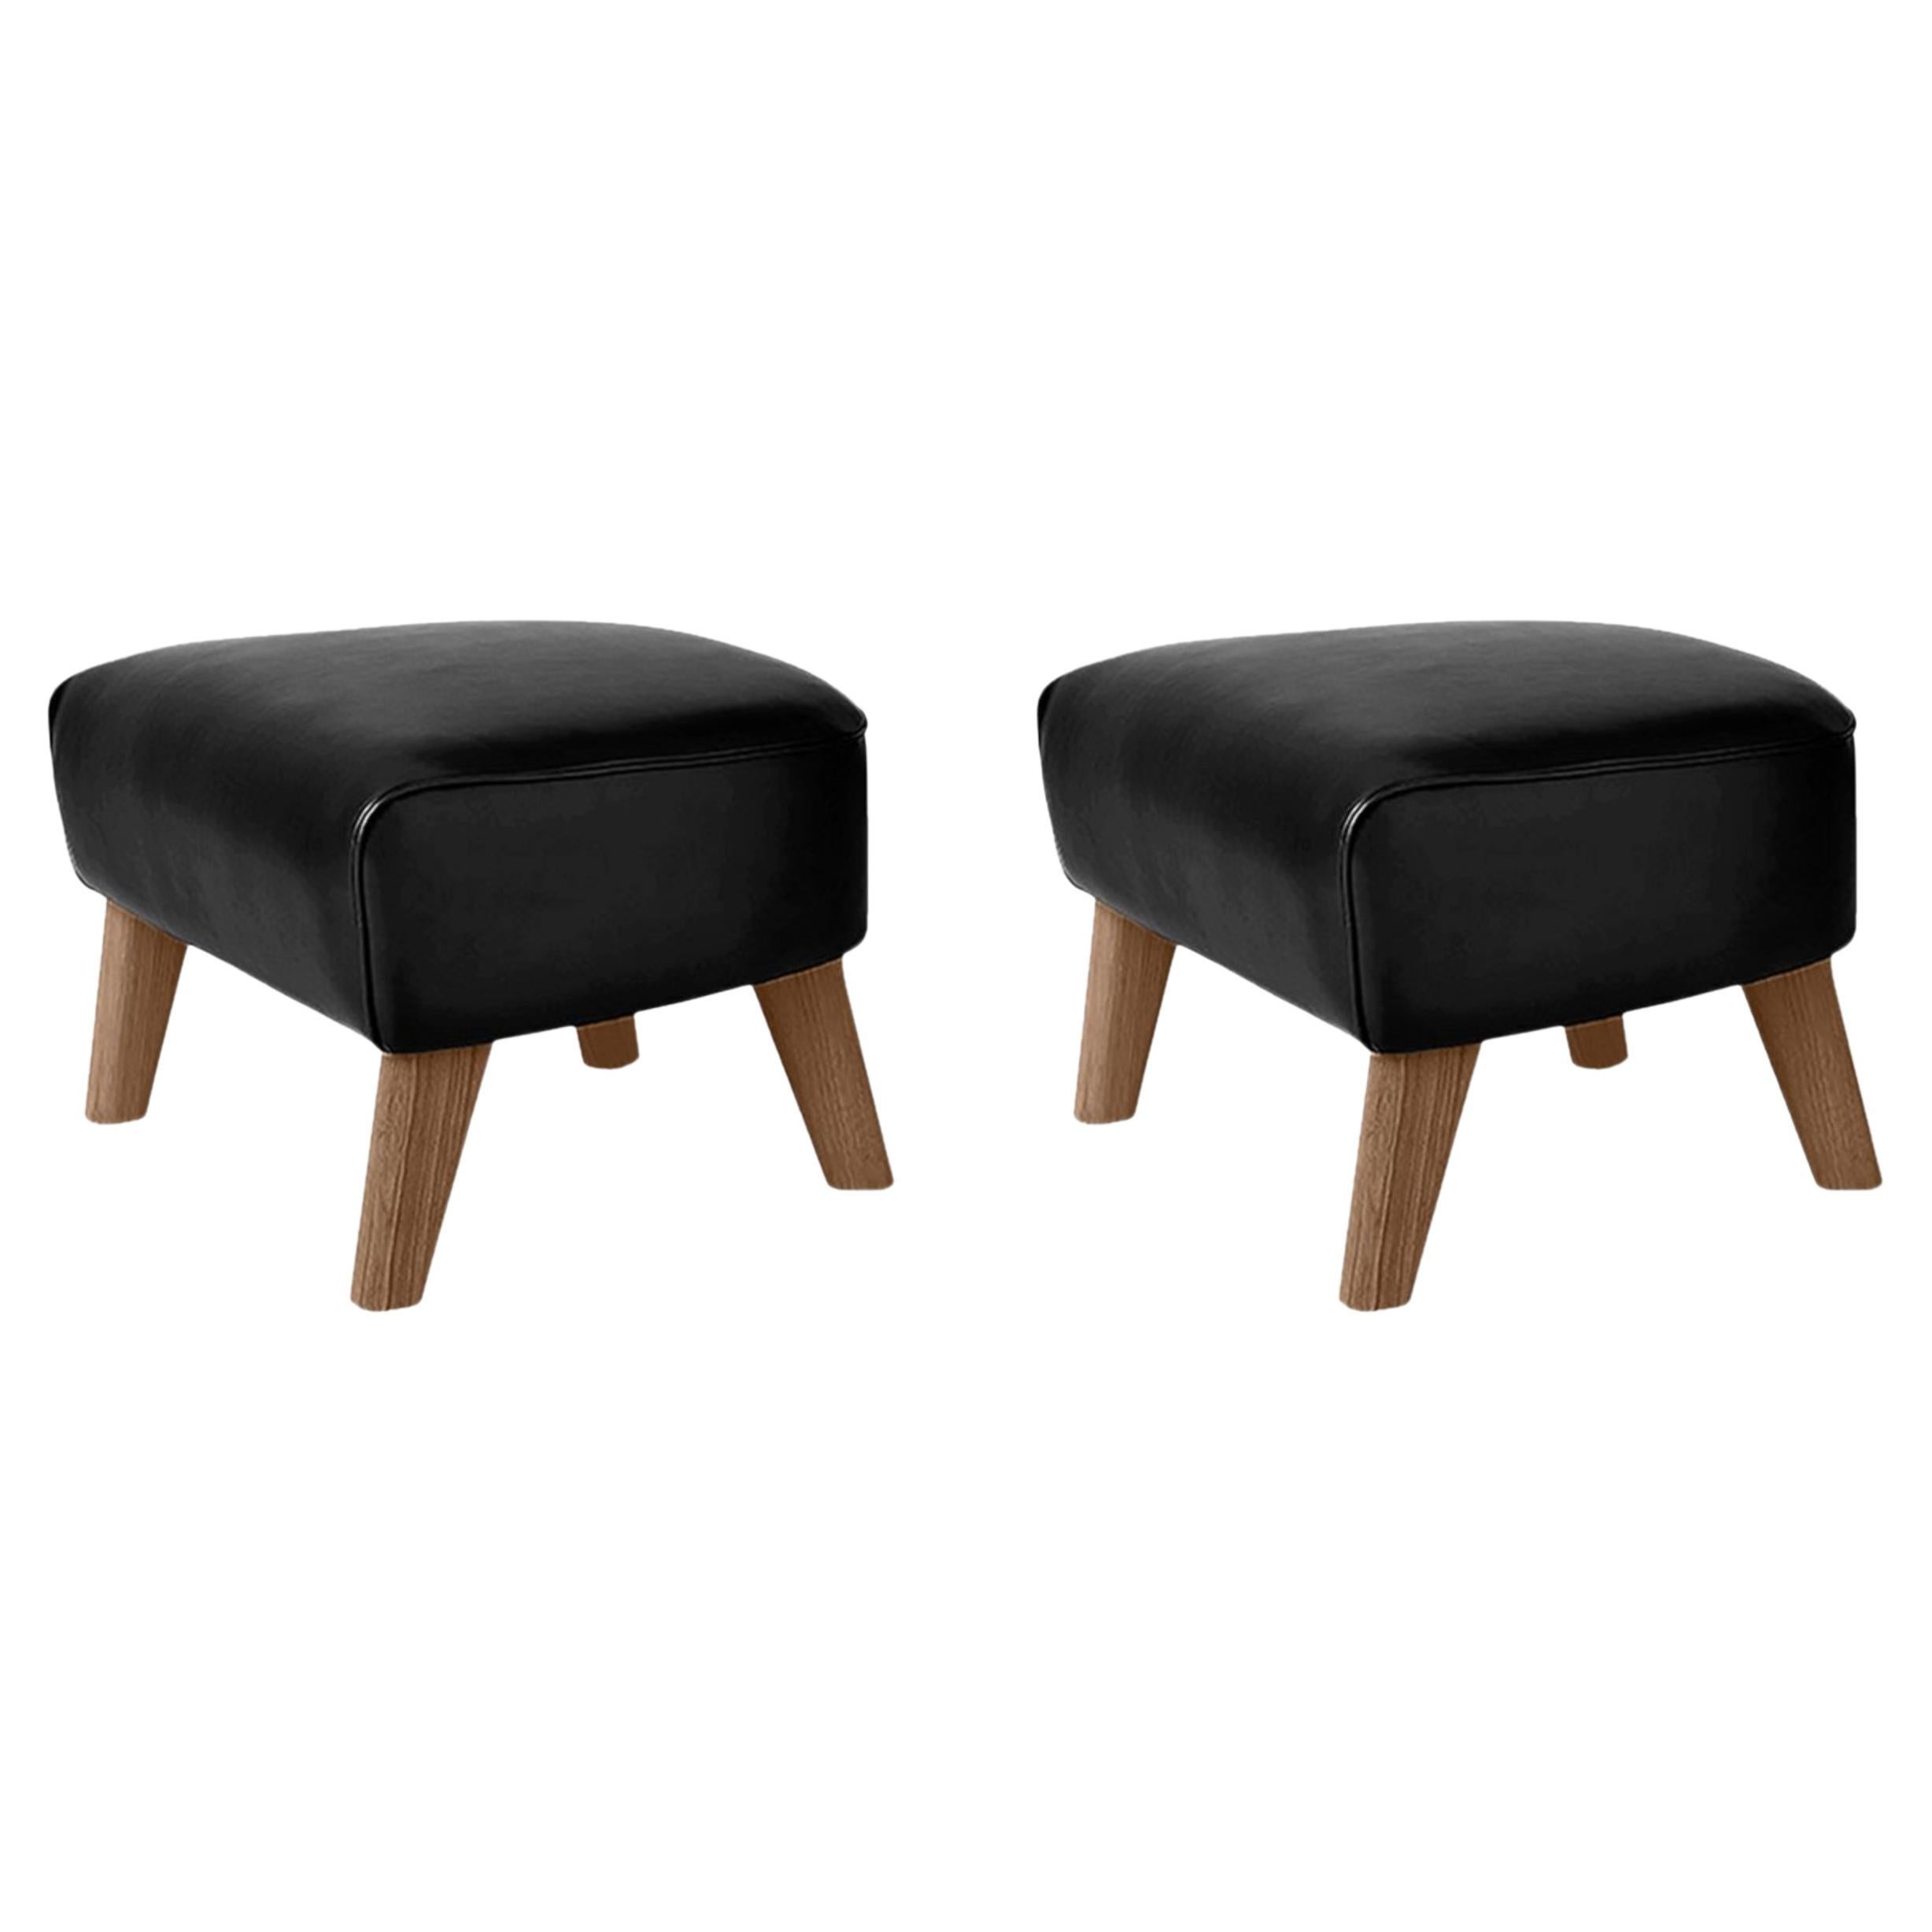 Set of 2 Black Leather and Smoked Oak My Own Chair Footstools by Lassen For Sale